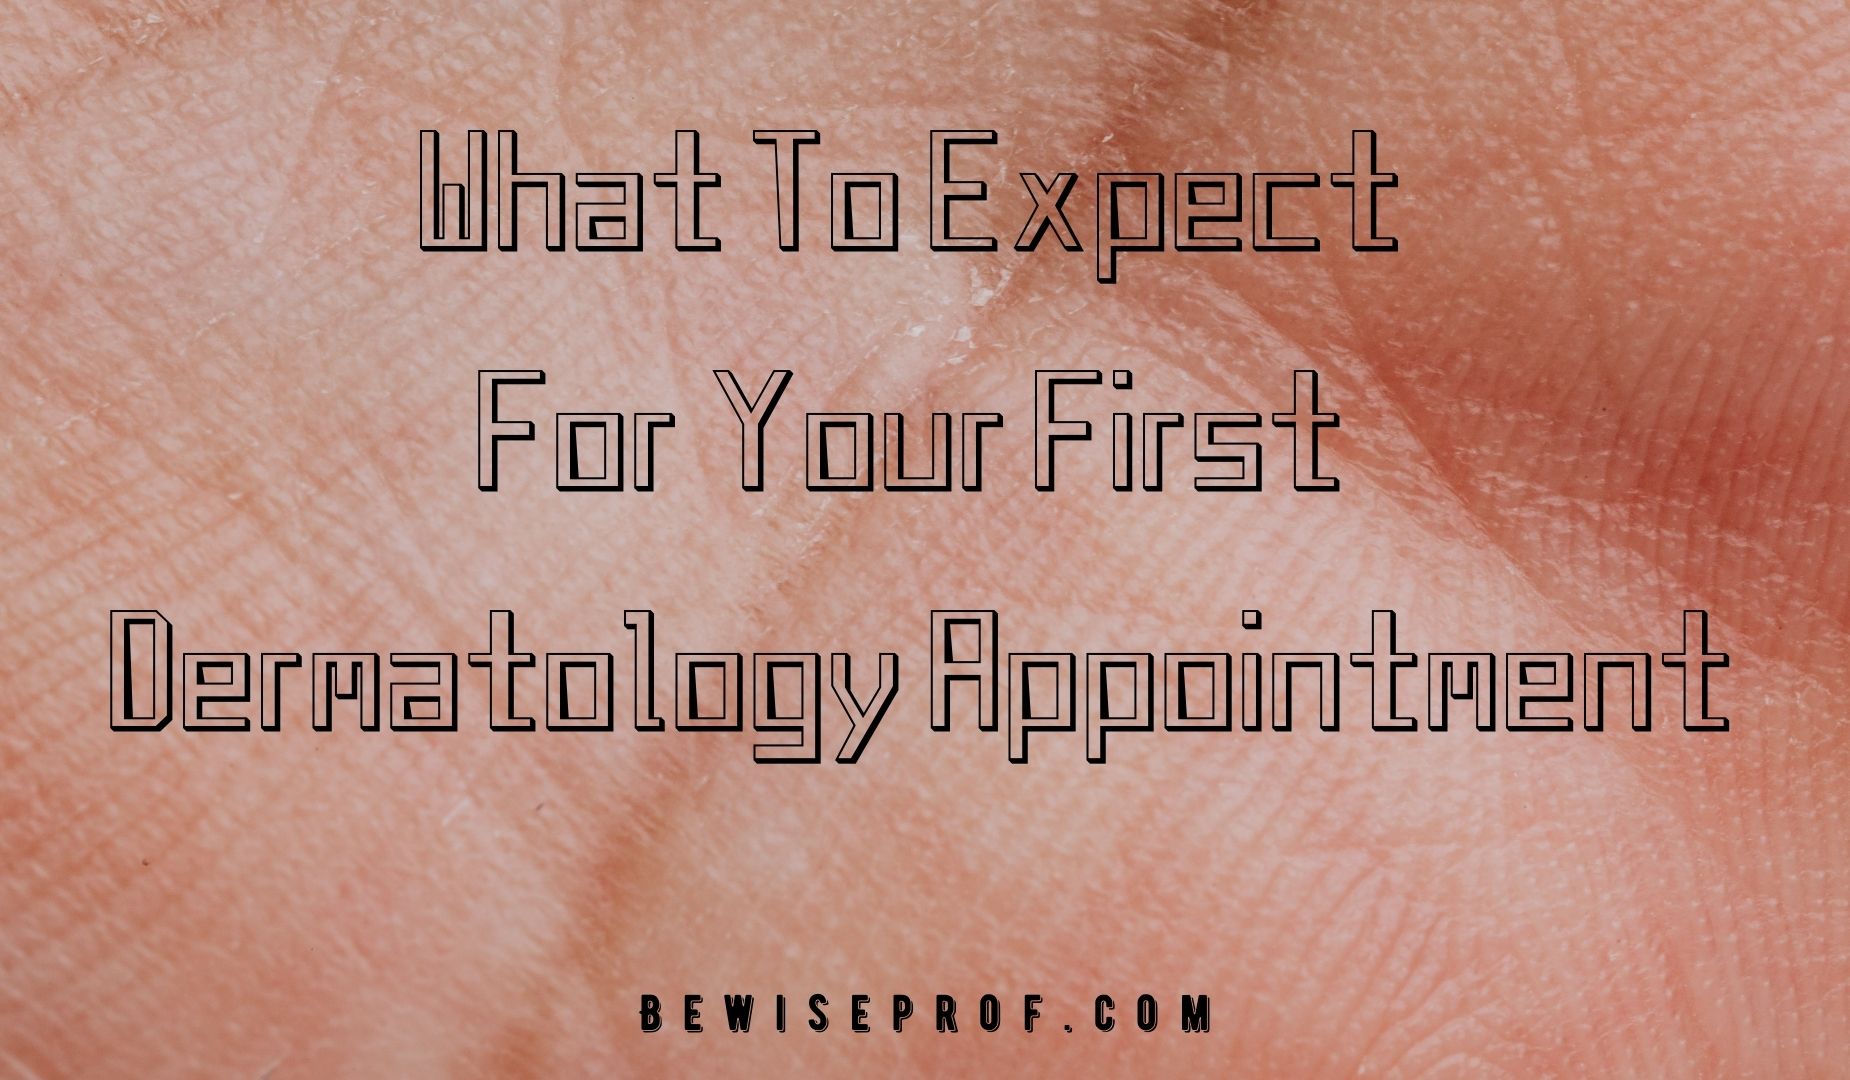 What To Expect For Your First Dermatology Appointment